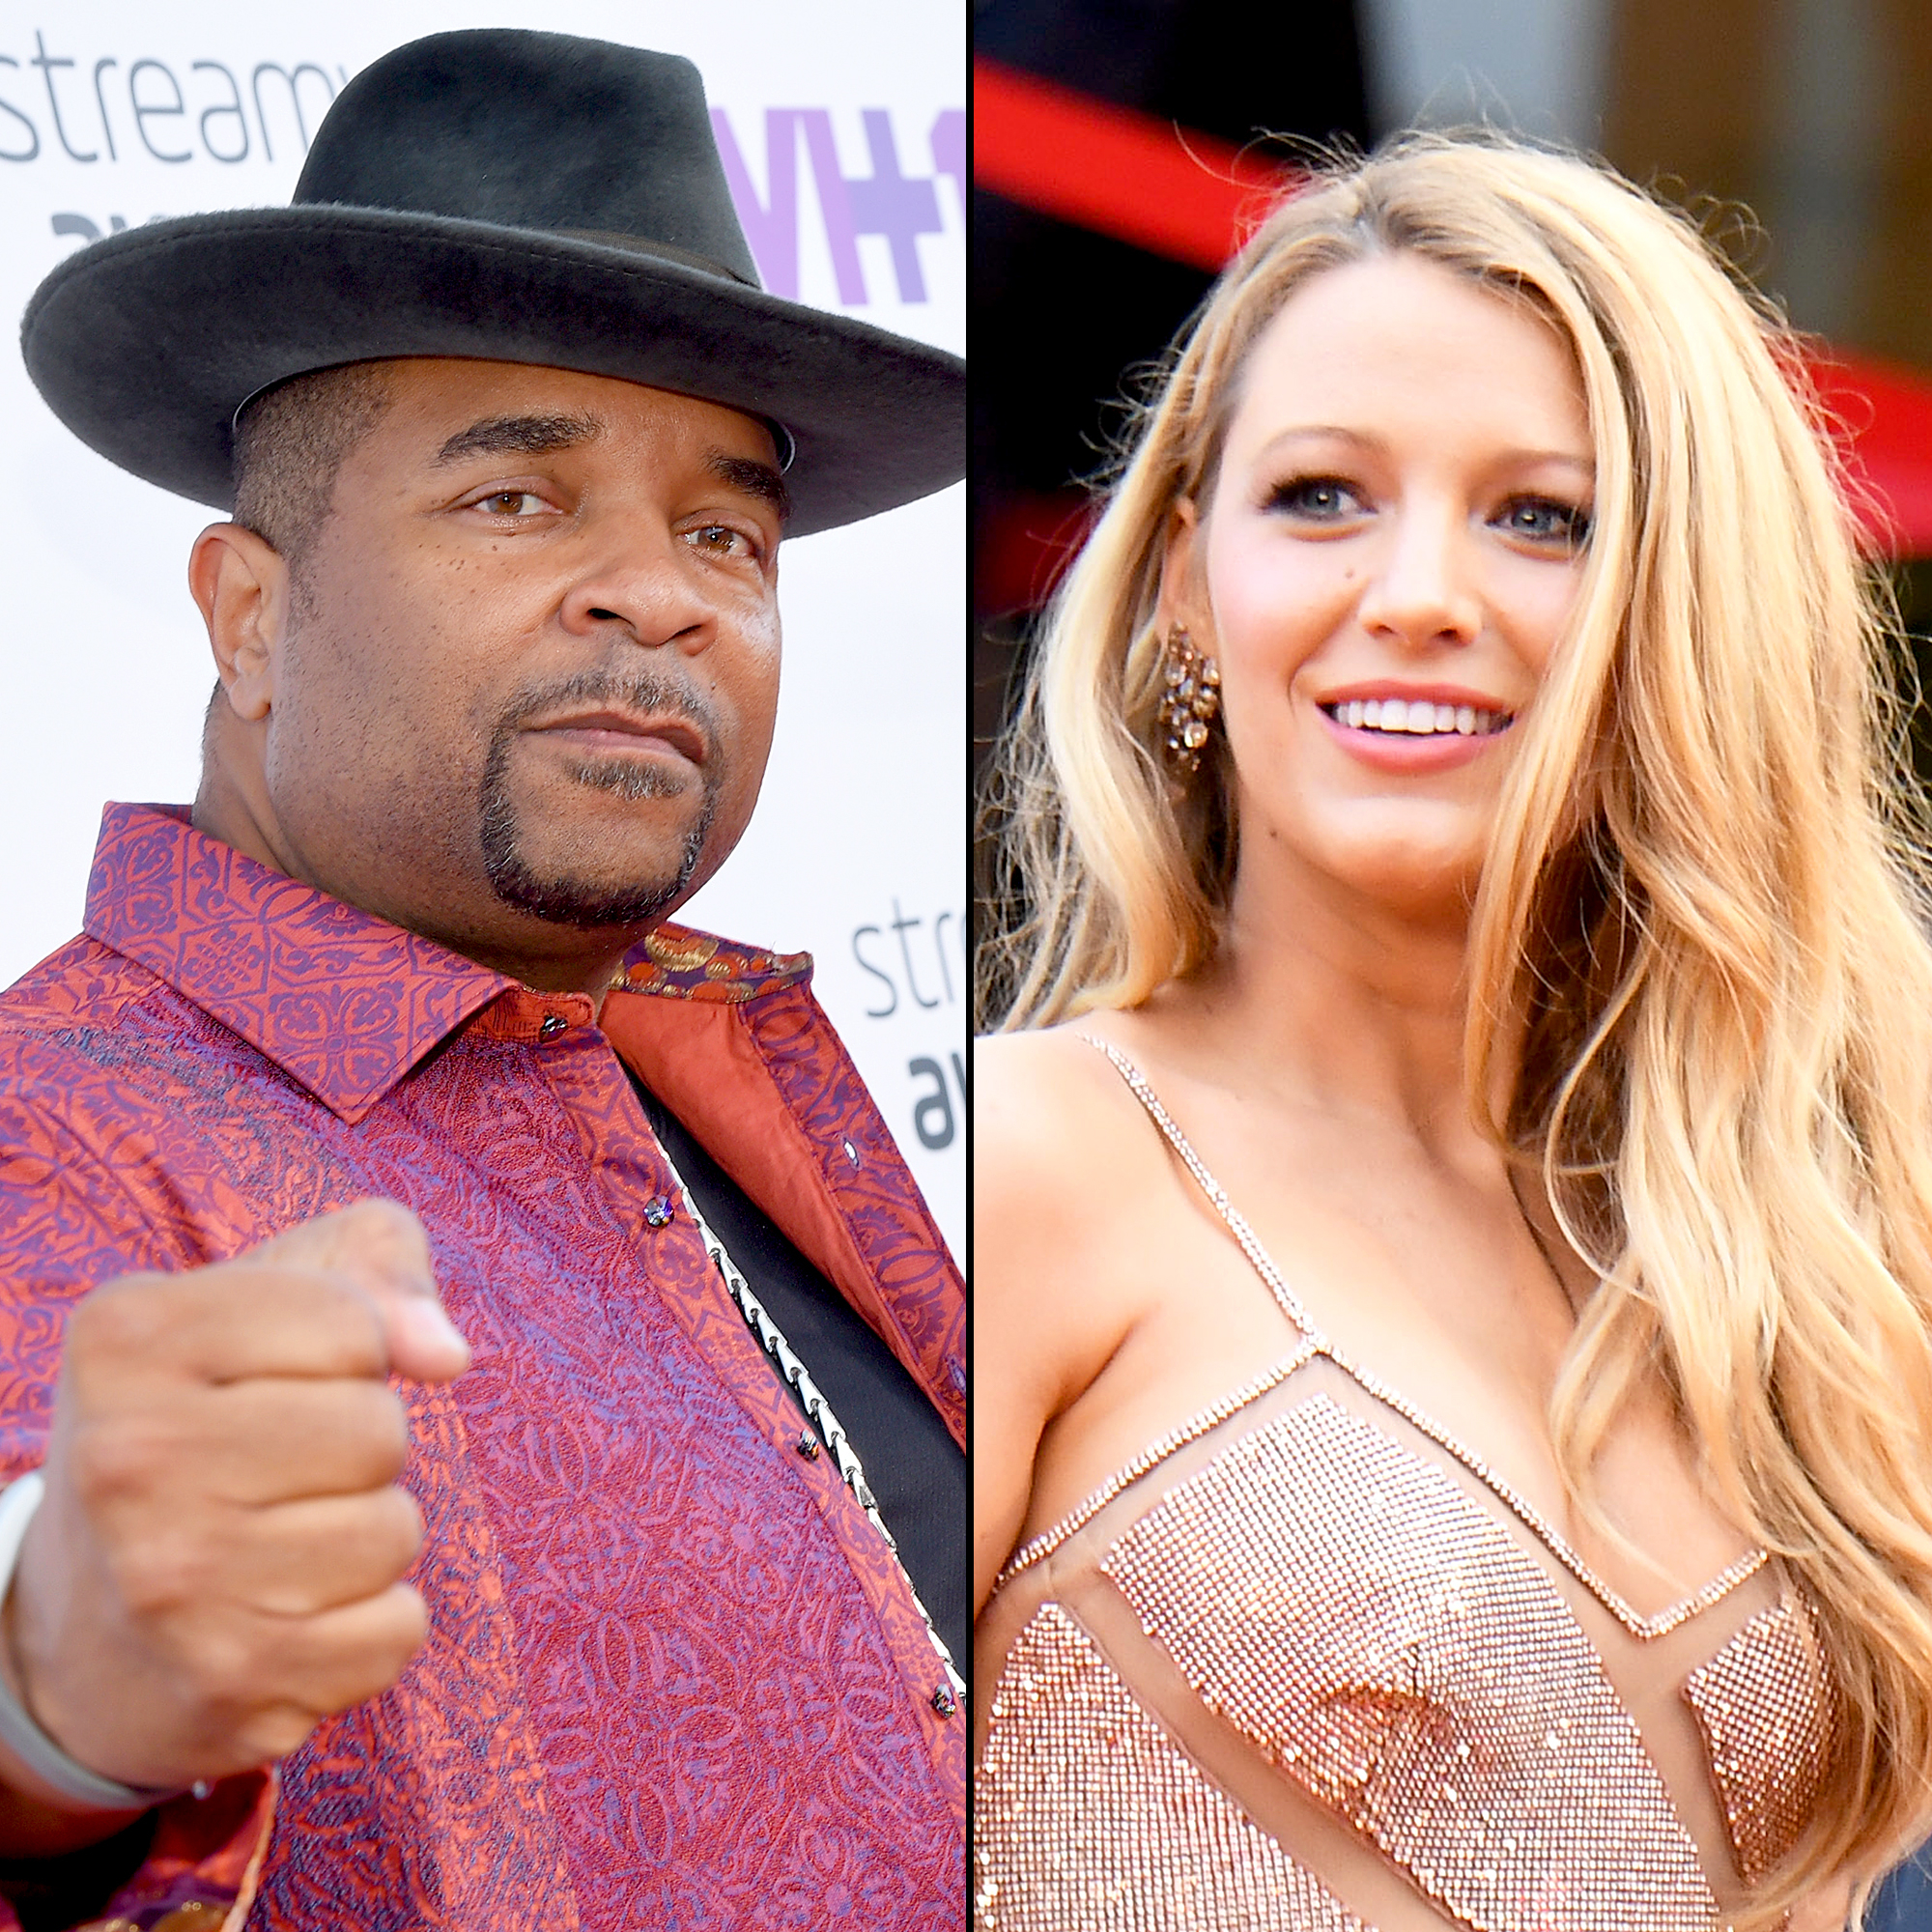 Sir Mix-a-Lot Writes Powerful Op-Ed After Blake Lively's Post